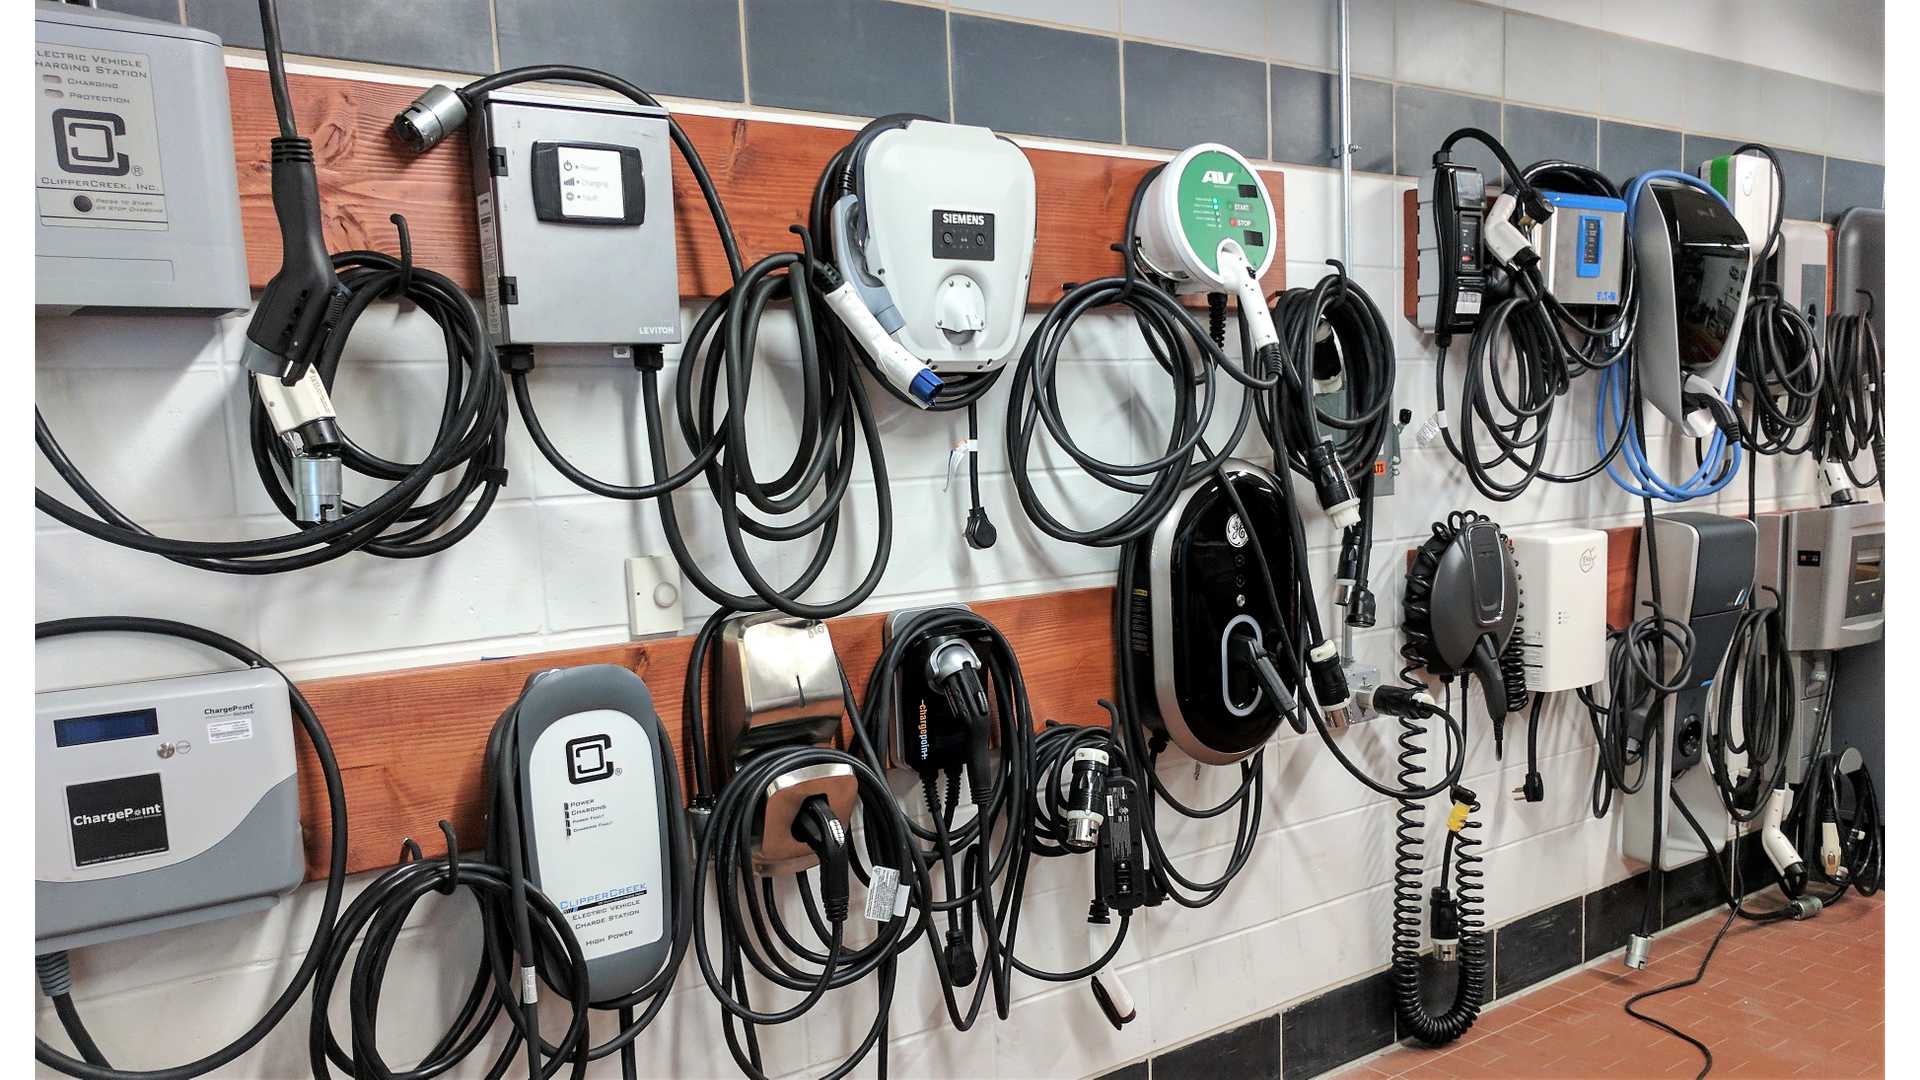 EV Charging Equipment Market to See Huge Growth by 2025 | Chargepoint, ABB, Eaton, Leviton, Blink